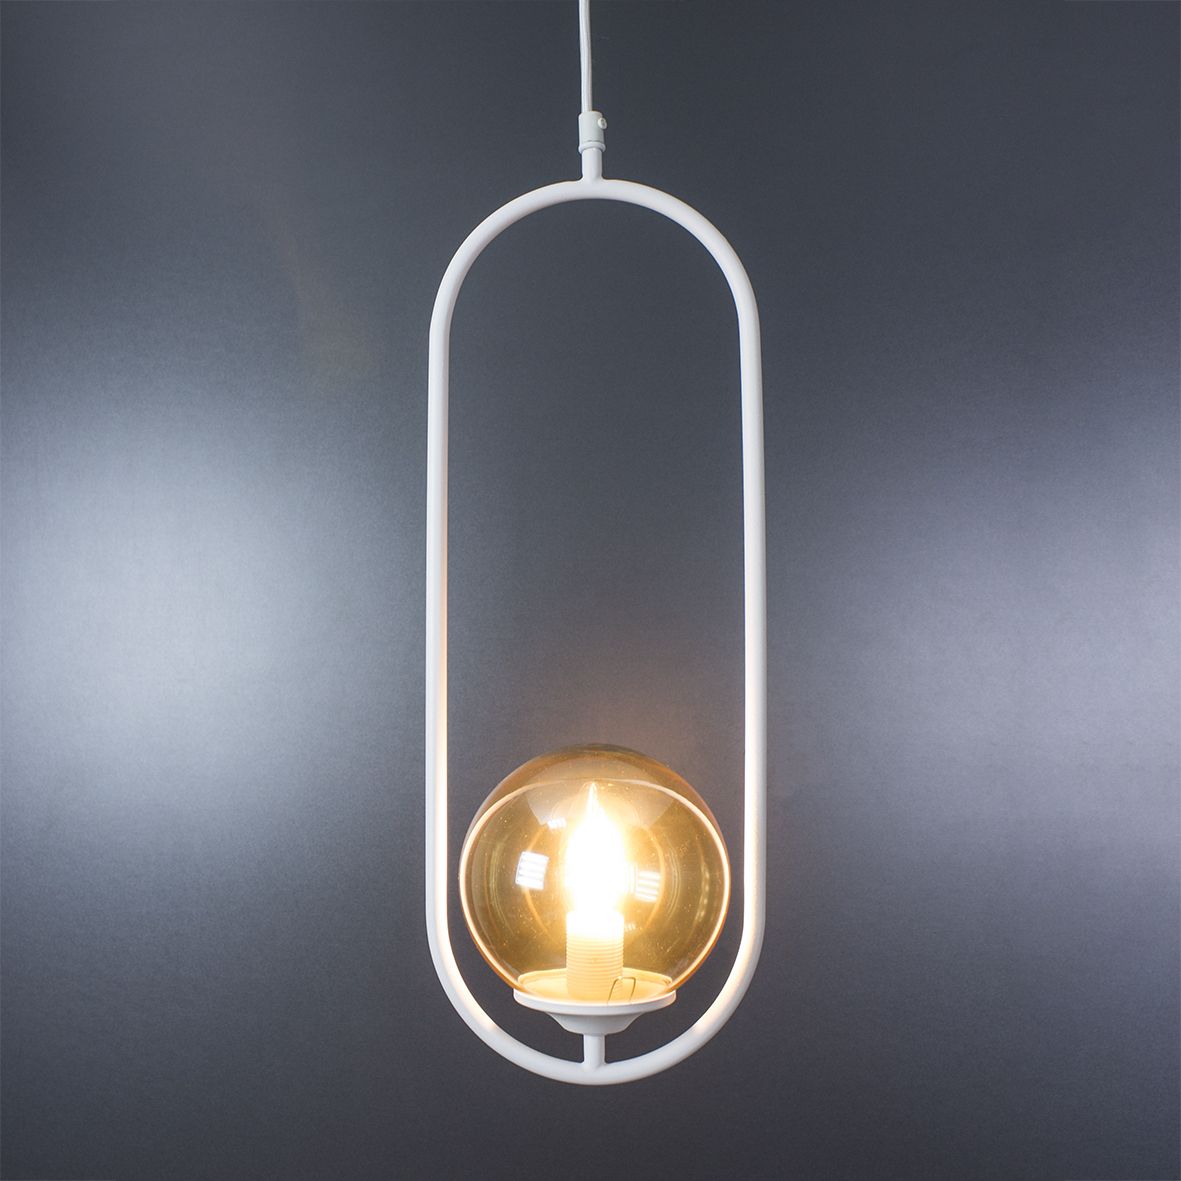 Suspension lamp Twins white / brown